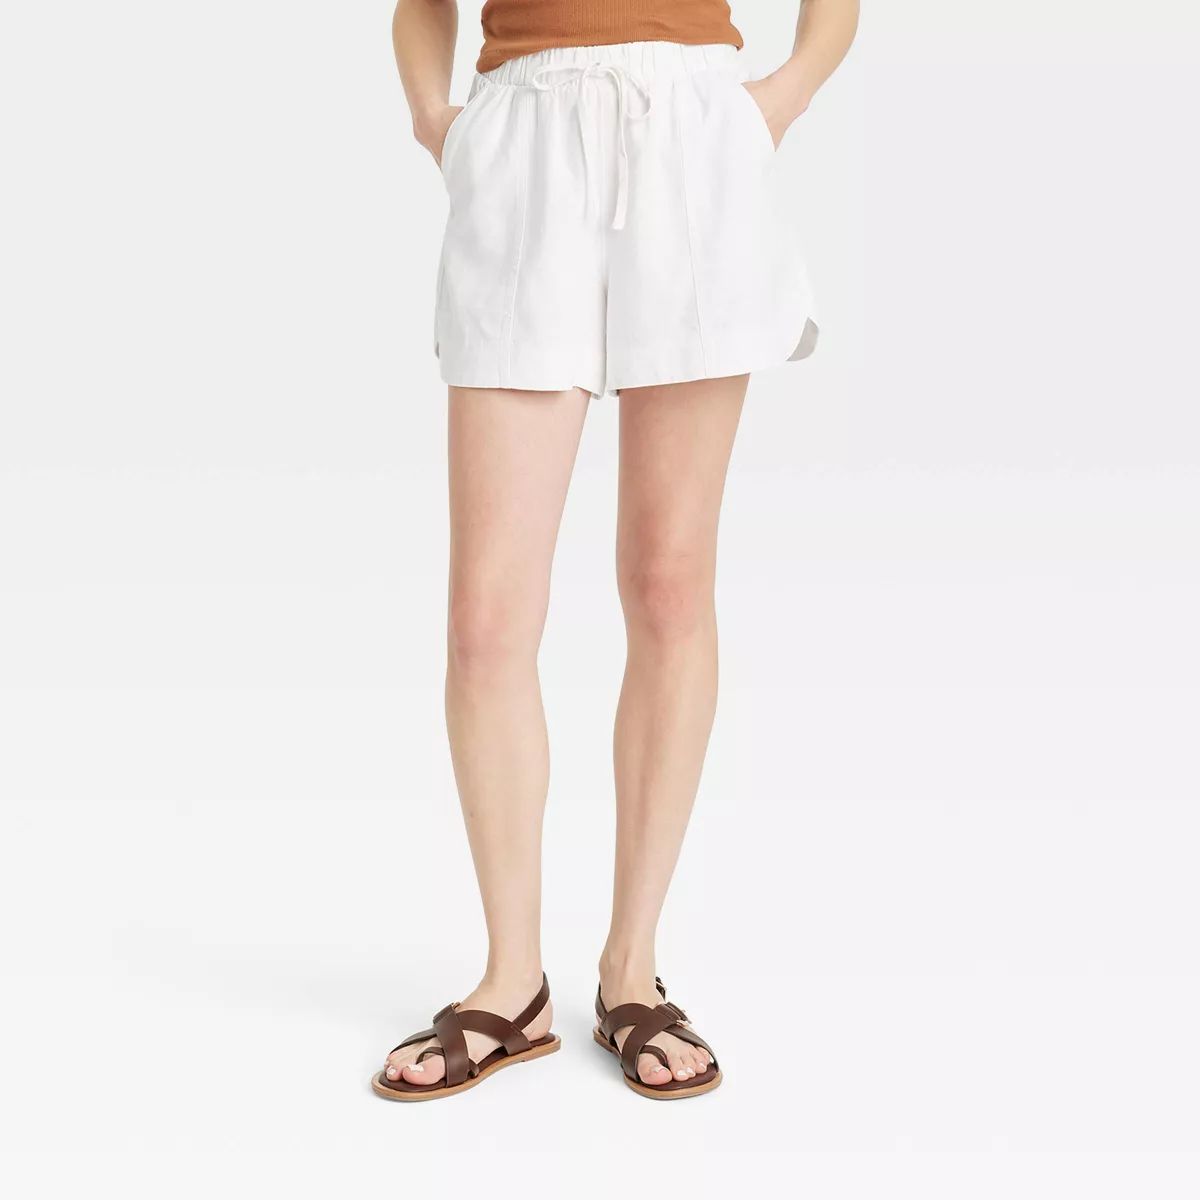 TargetClothing, Shoes & AccessoriesWomen’s ClothingBottomsShorts | Target